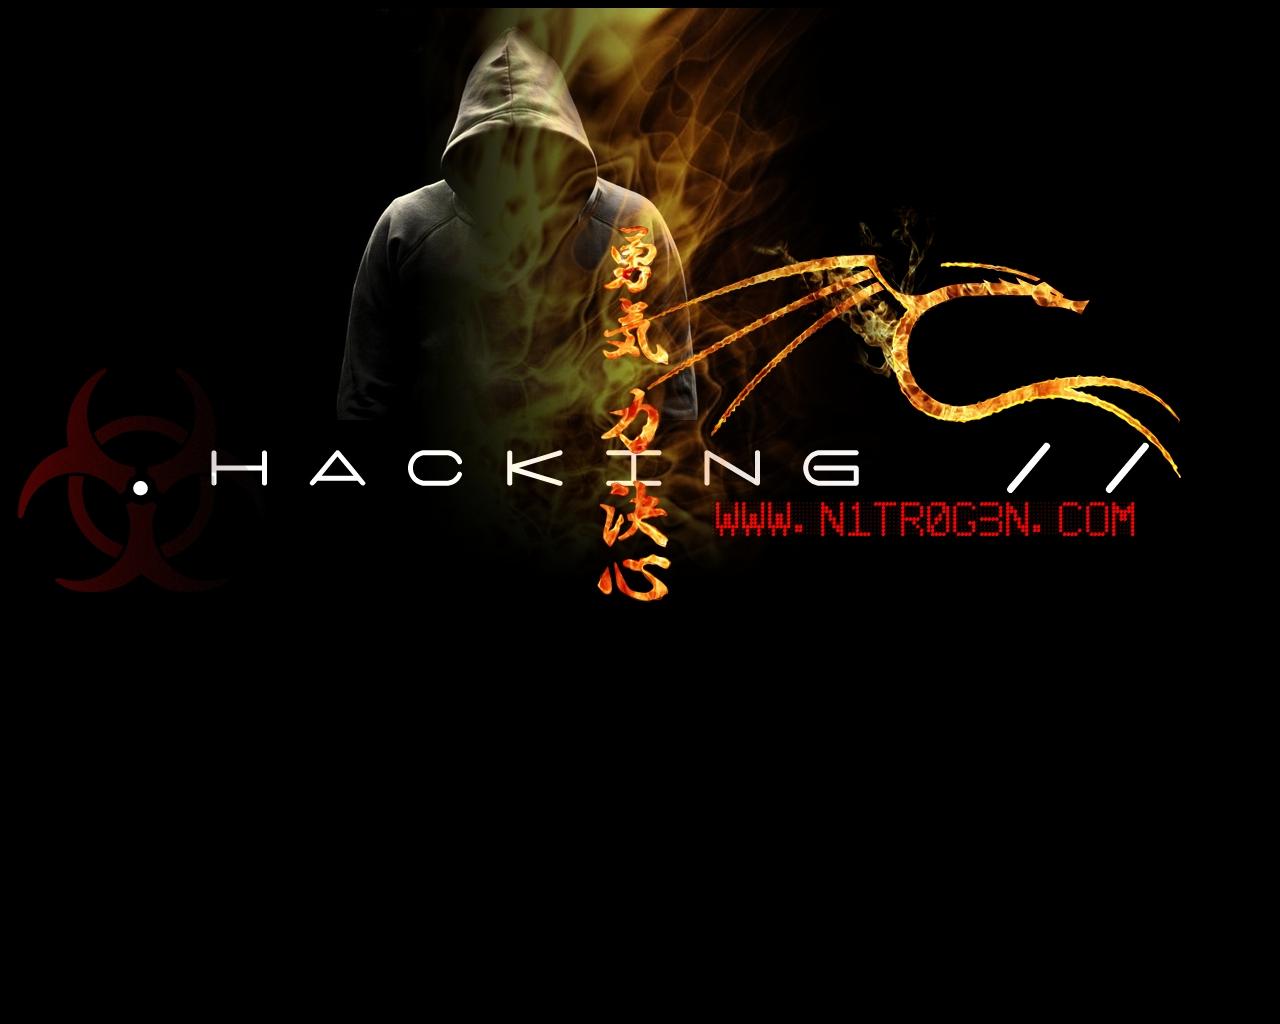 Ethical Hacking Wallpaper. Ethical